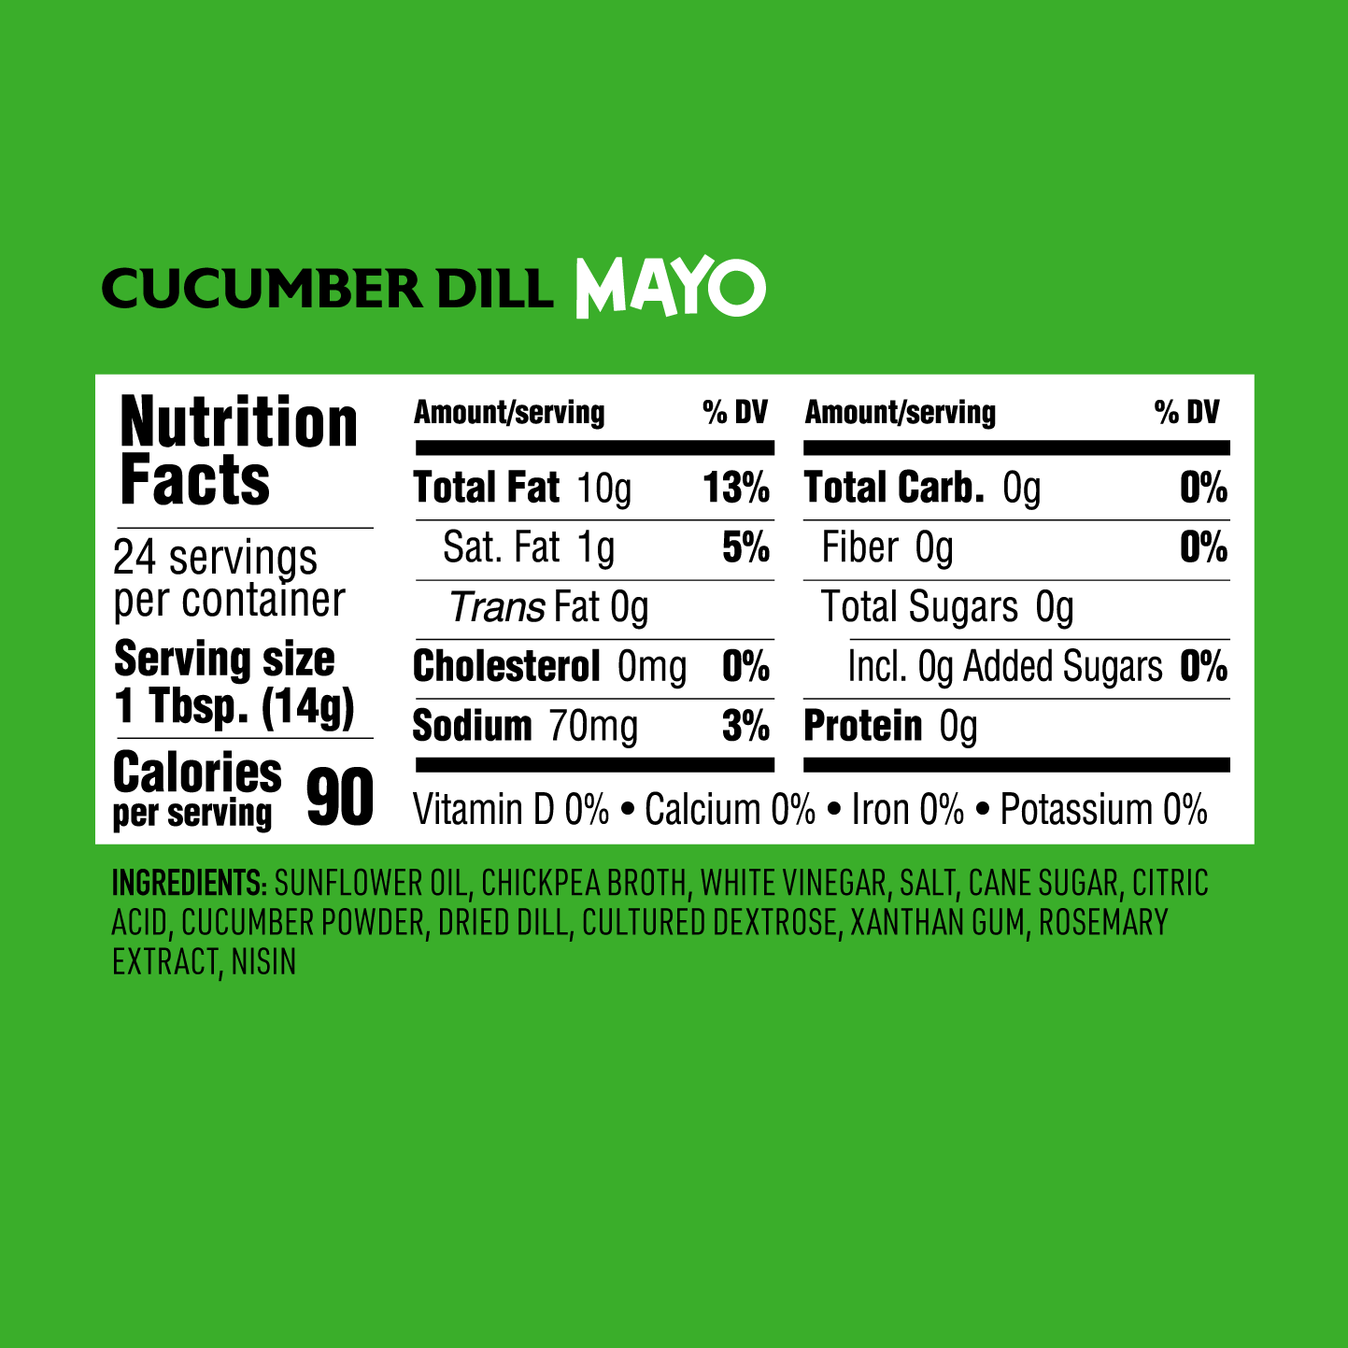 Nutrition facts for O'dang Foods brand Cucumber Dill Vegan Mayo made with chickpeas and sunflower oil. Carb free, cholesterol free, clean label.